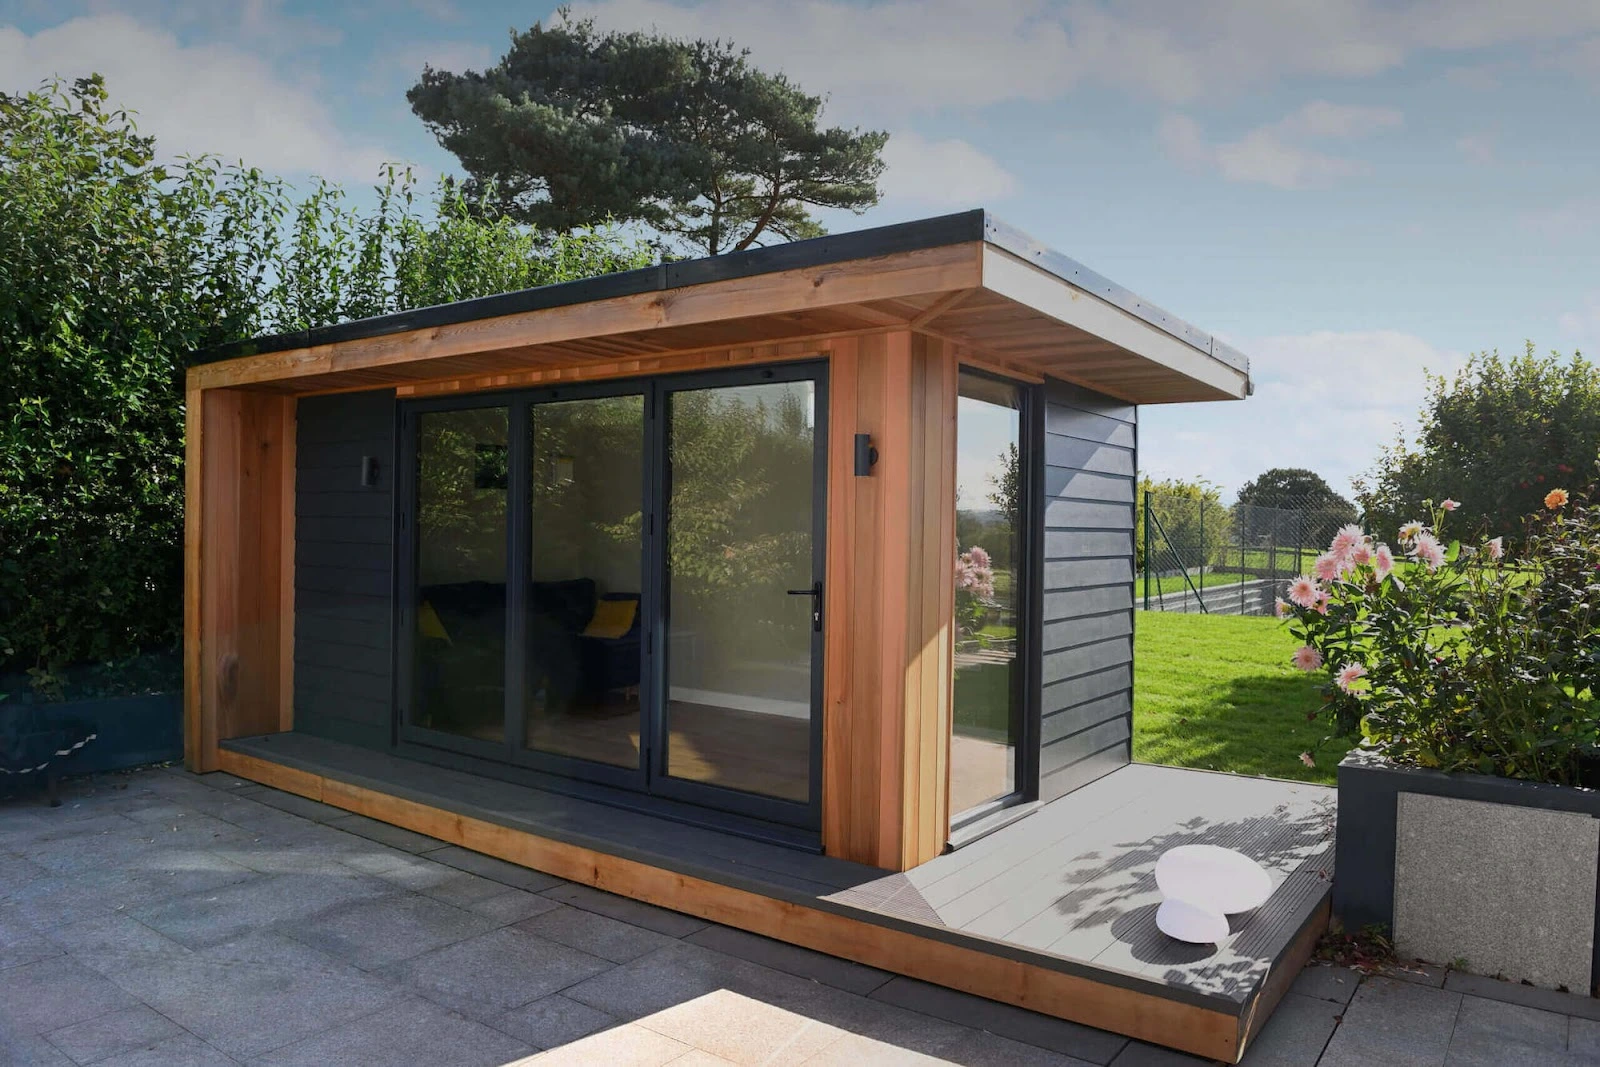 The Beauty and Versatility of Garden Rooms